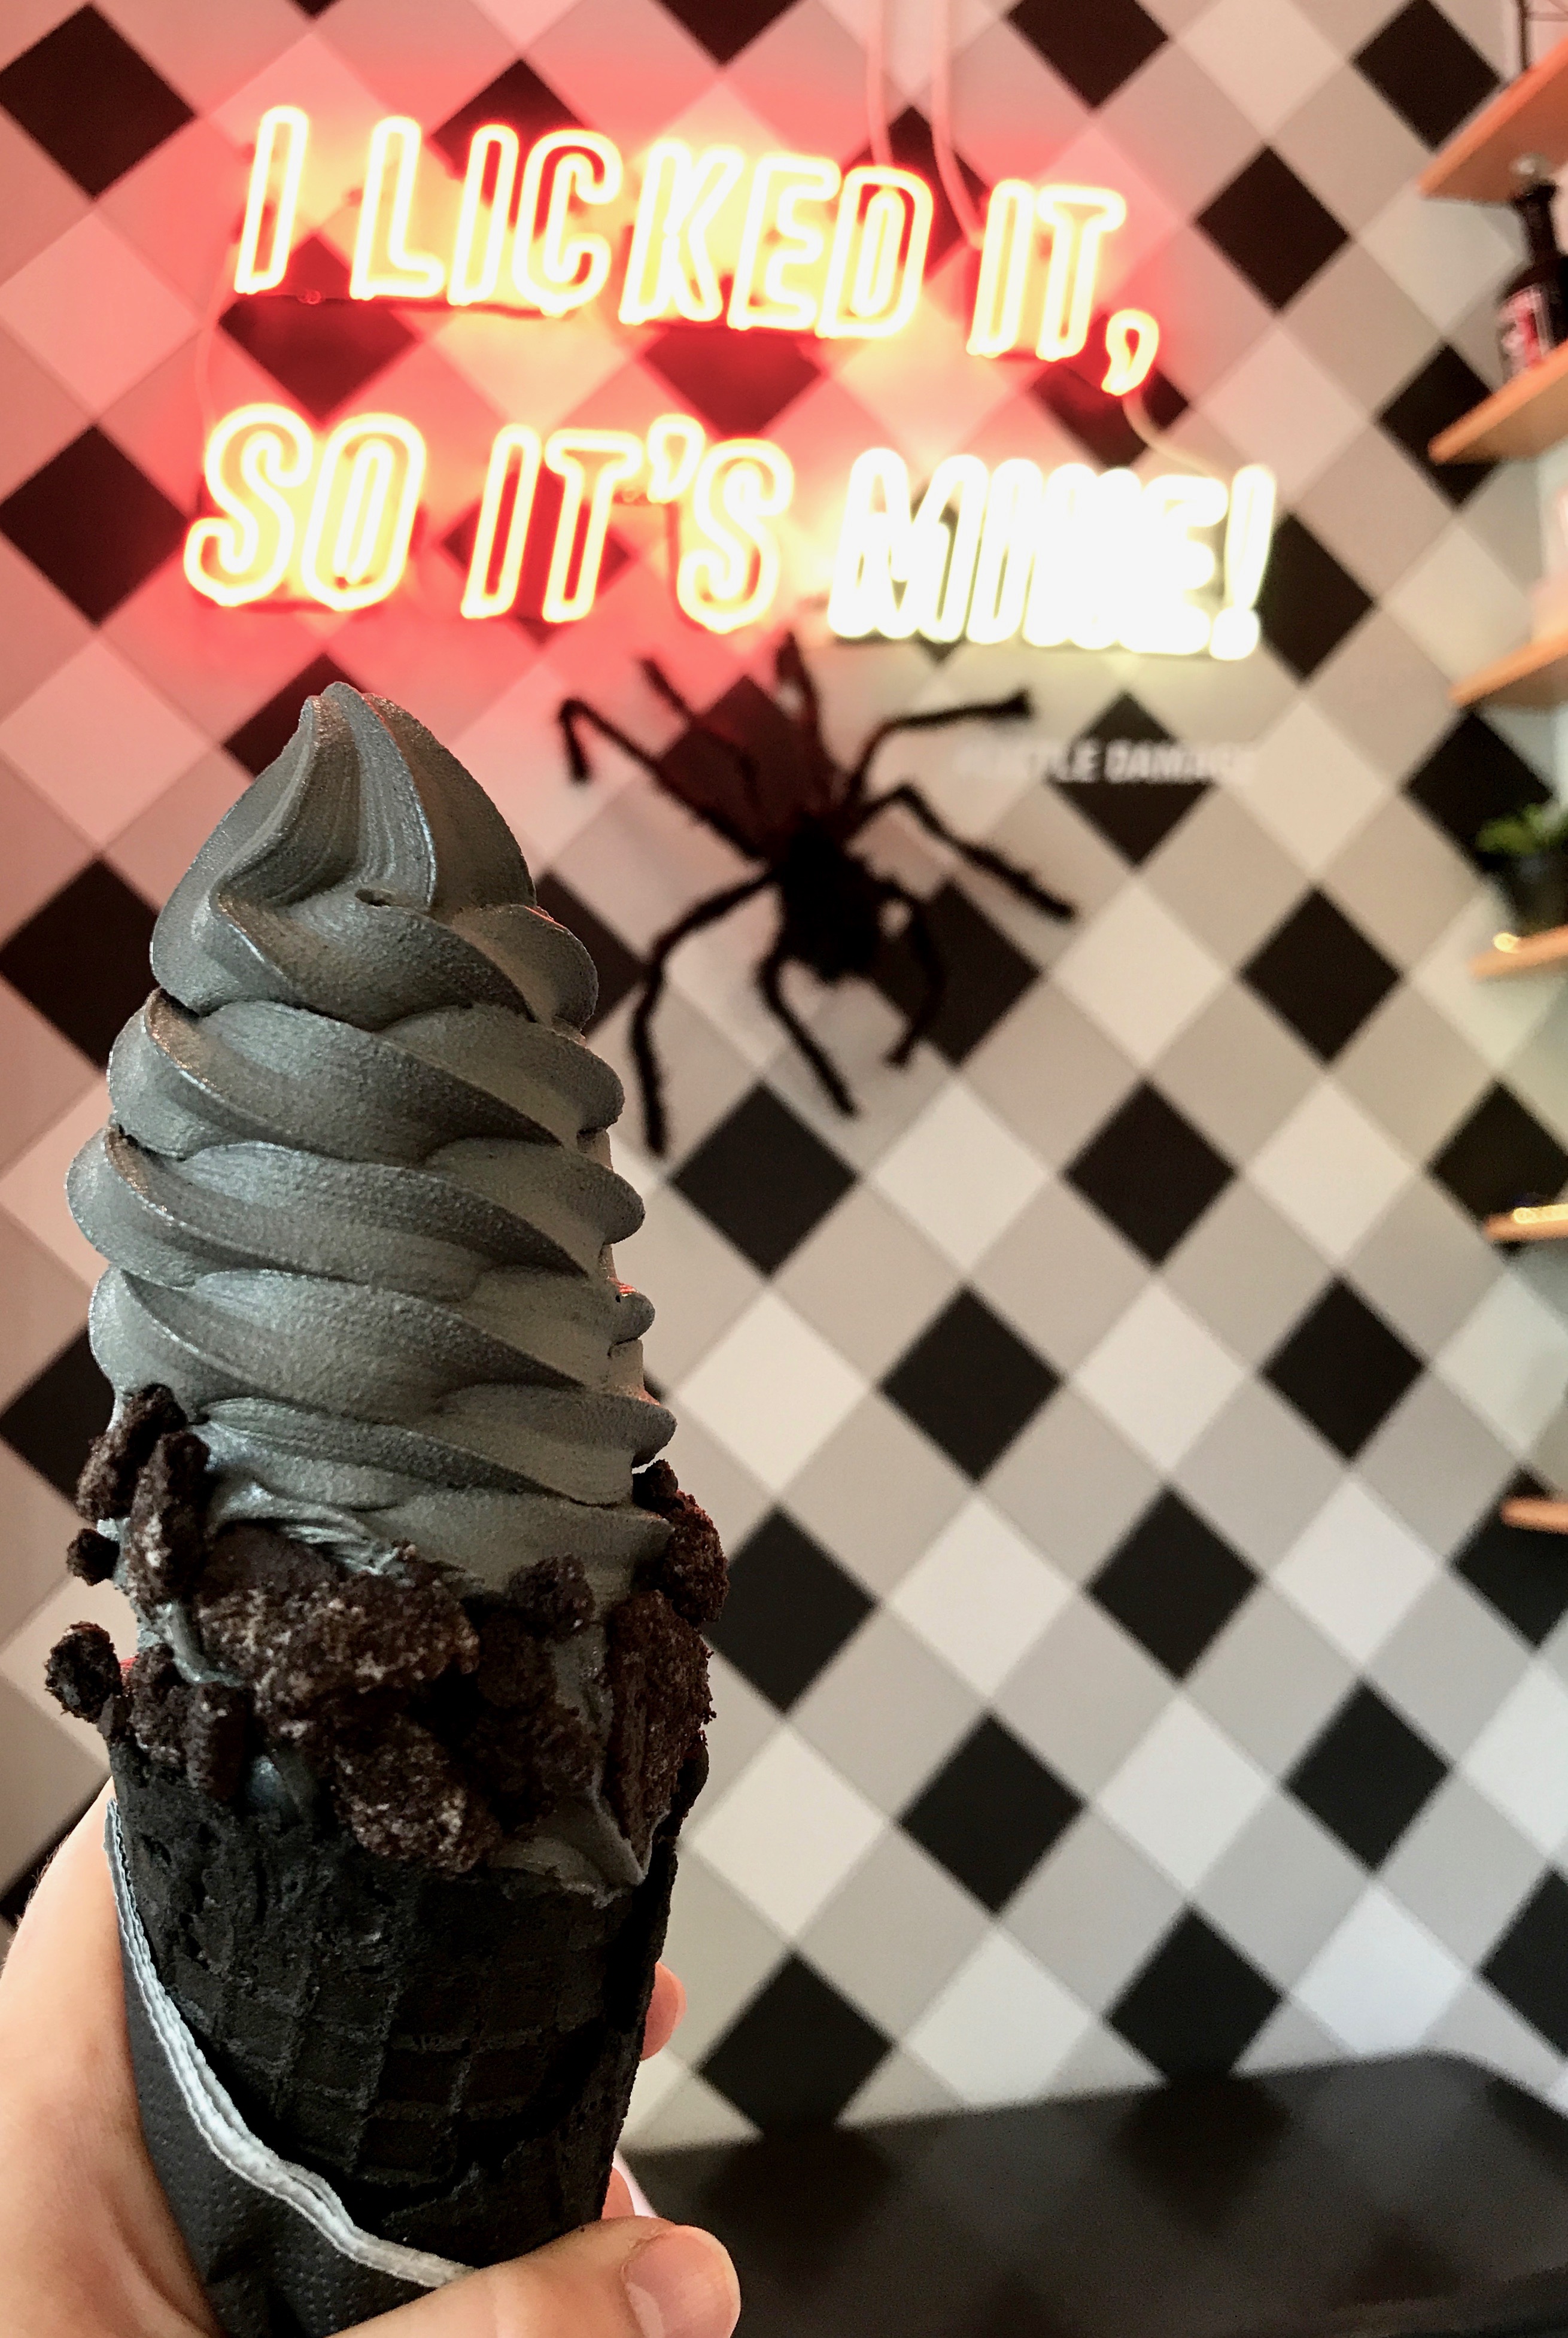 Little Damage Soft Serve review - The Batter Thickens